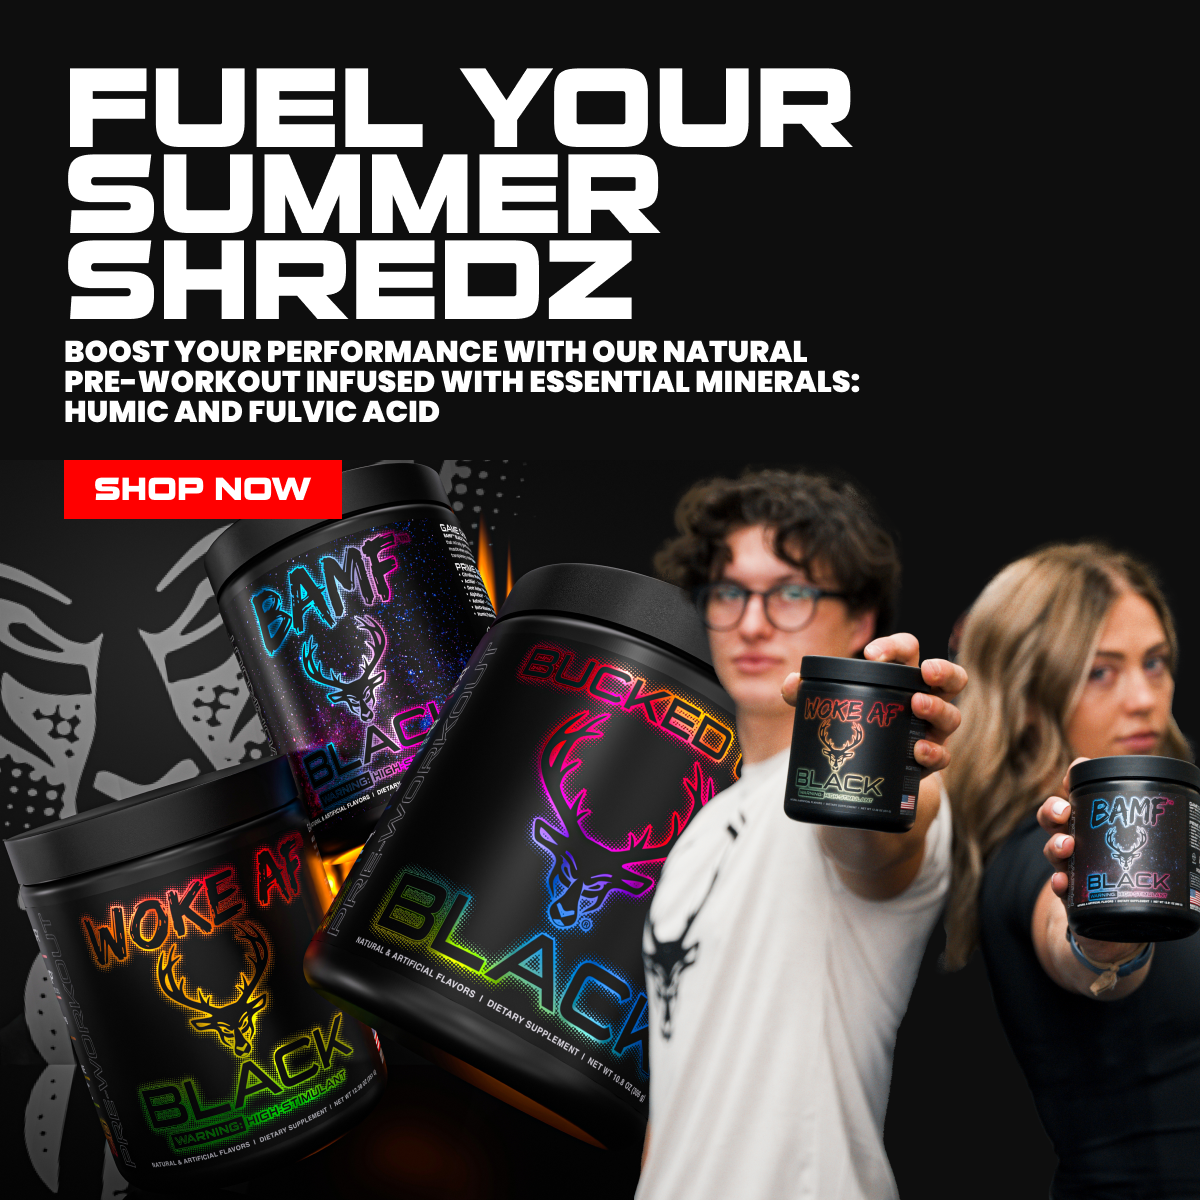 Bucked Up Black - Text reads "Fuel your summer shredz, boost your performance with our natural pre-workout infused with essential minerals: humic and fulvic acid".  There is a button that reads "shop now".  The image is of a man and a